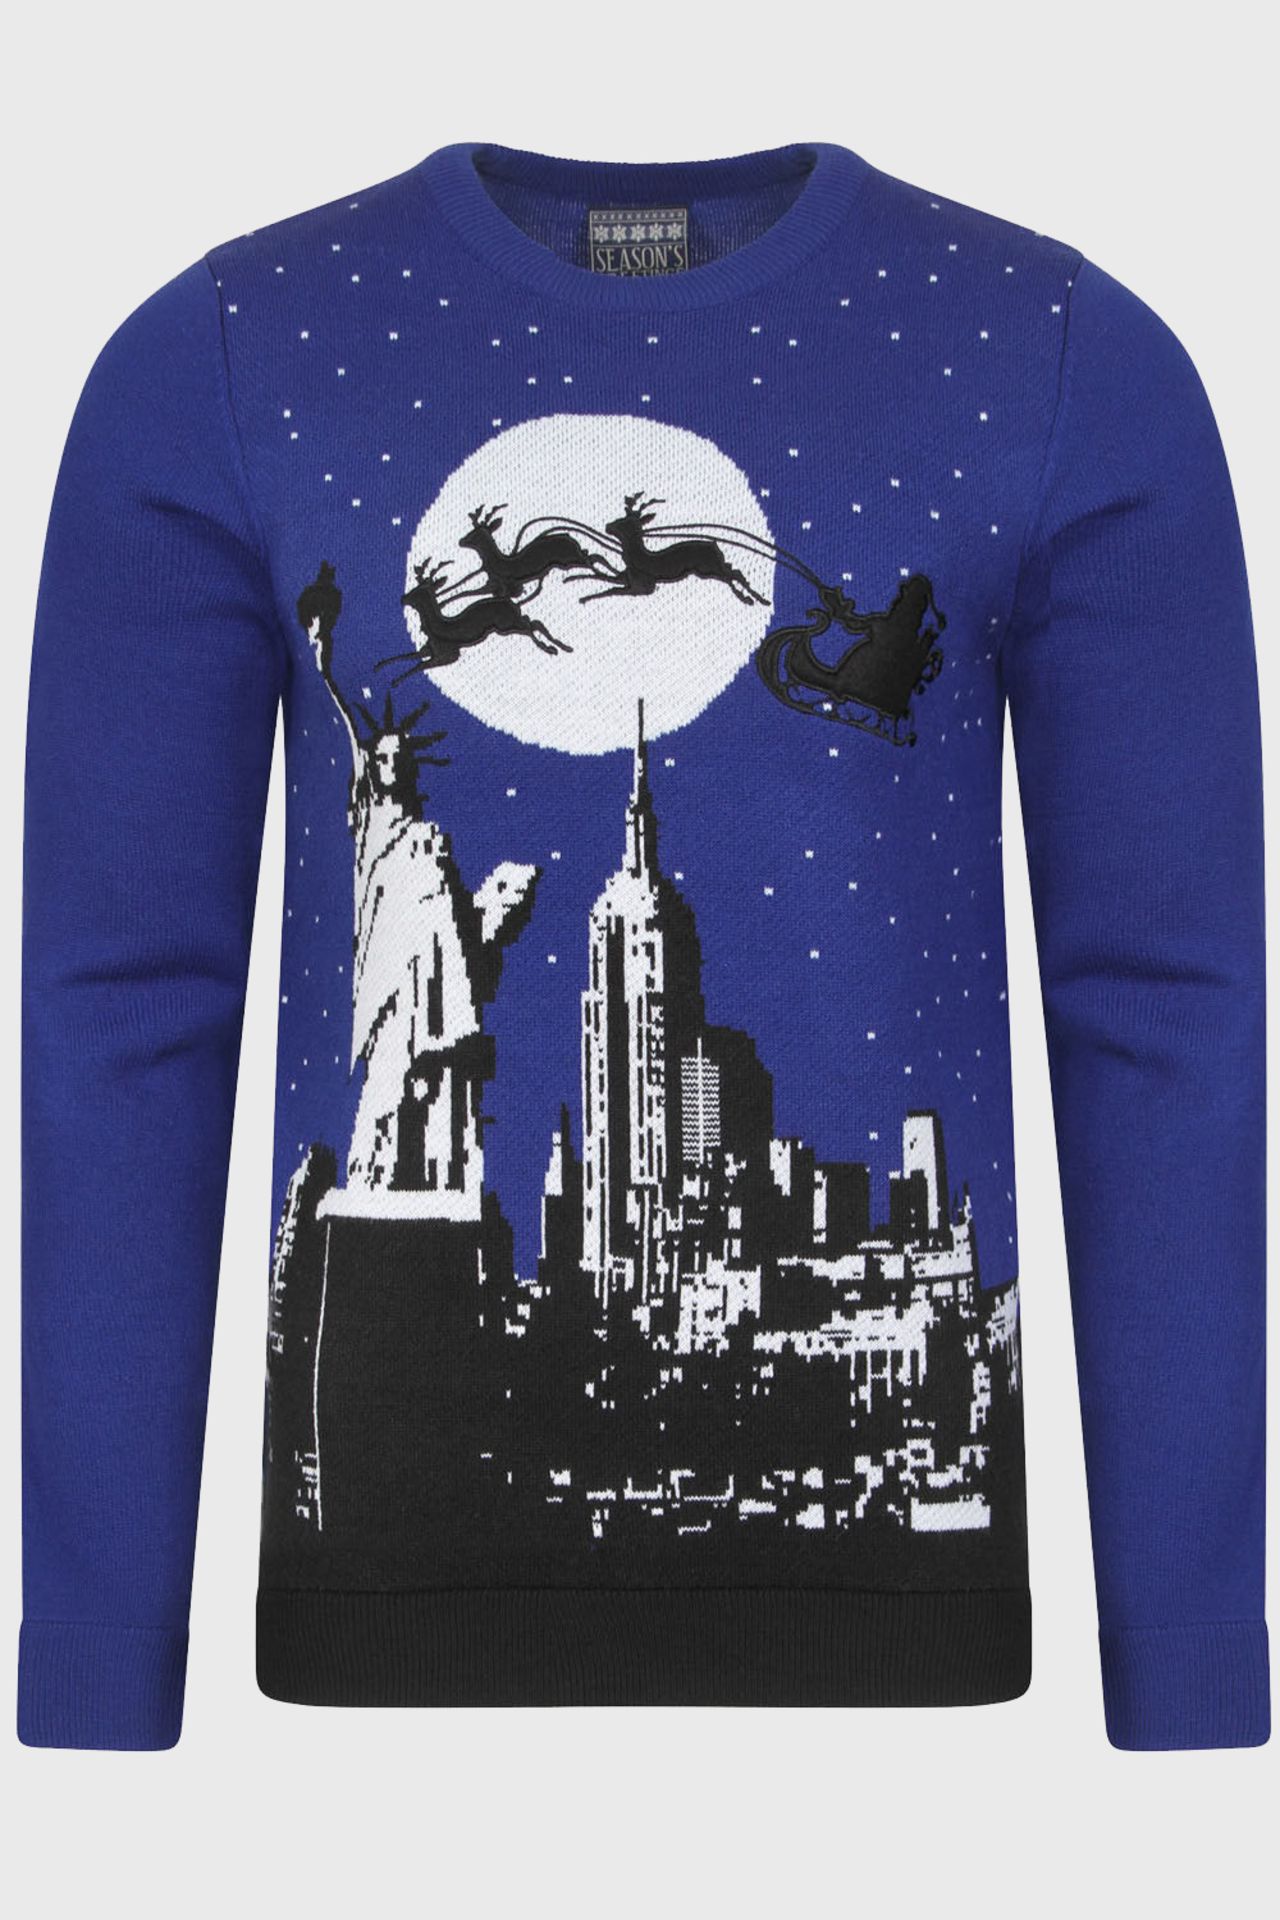 39 X BRAND NEW NOVELTY FESTIVE JUMPERS IE. SANTA SLEIGH IN NEW YORK BLUE (XL-6, L-26), MERRY